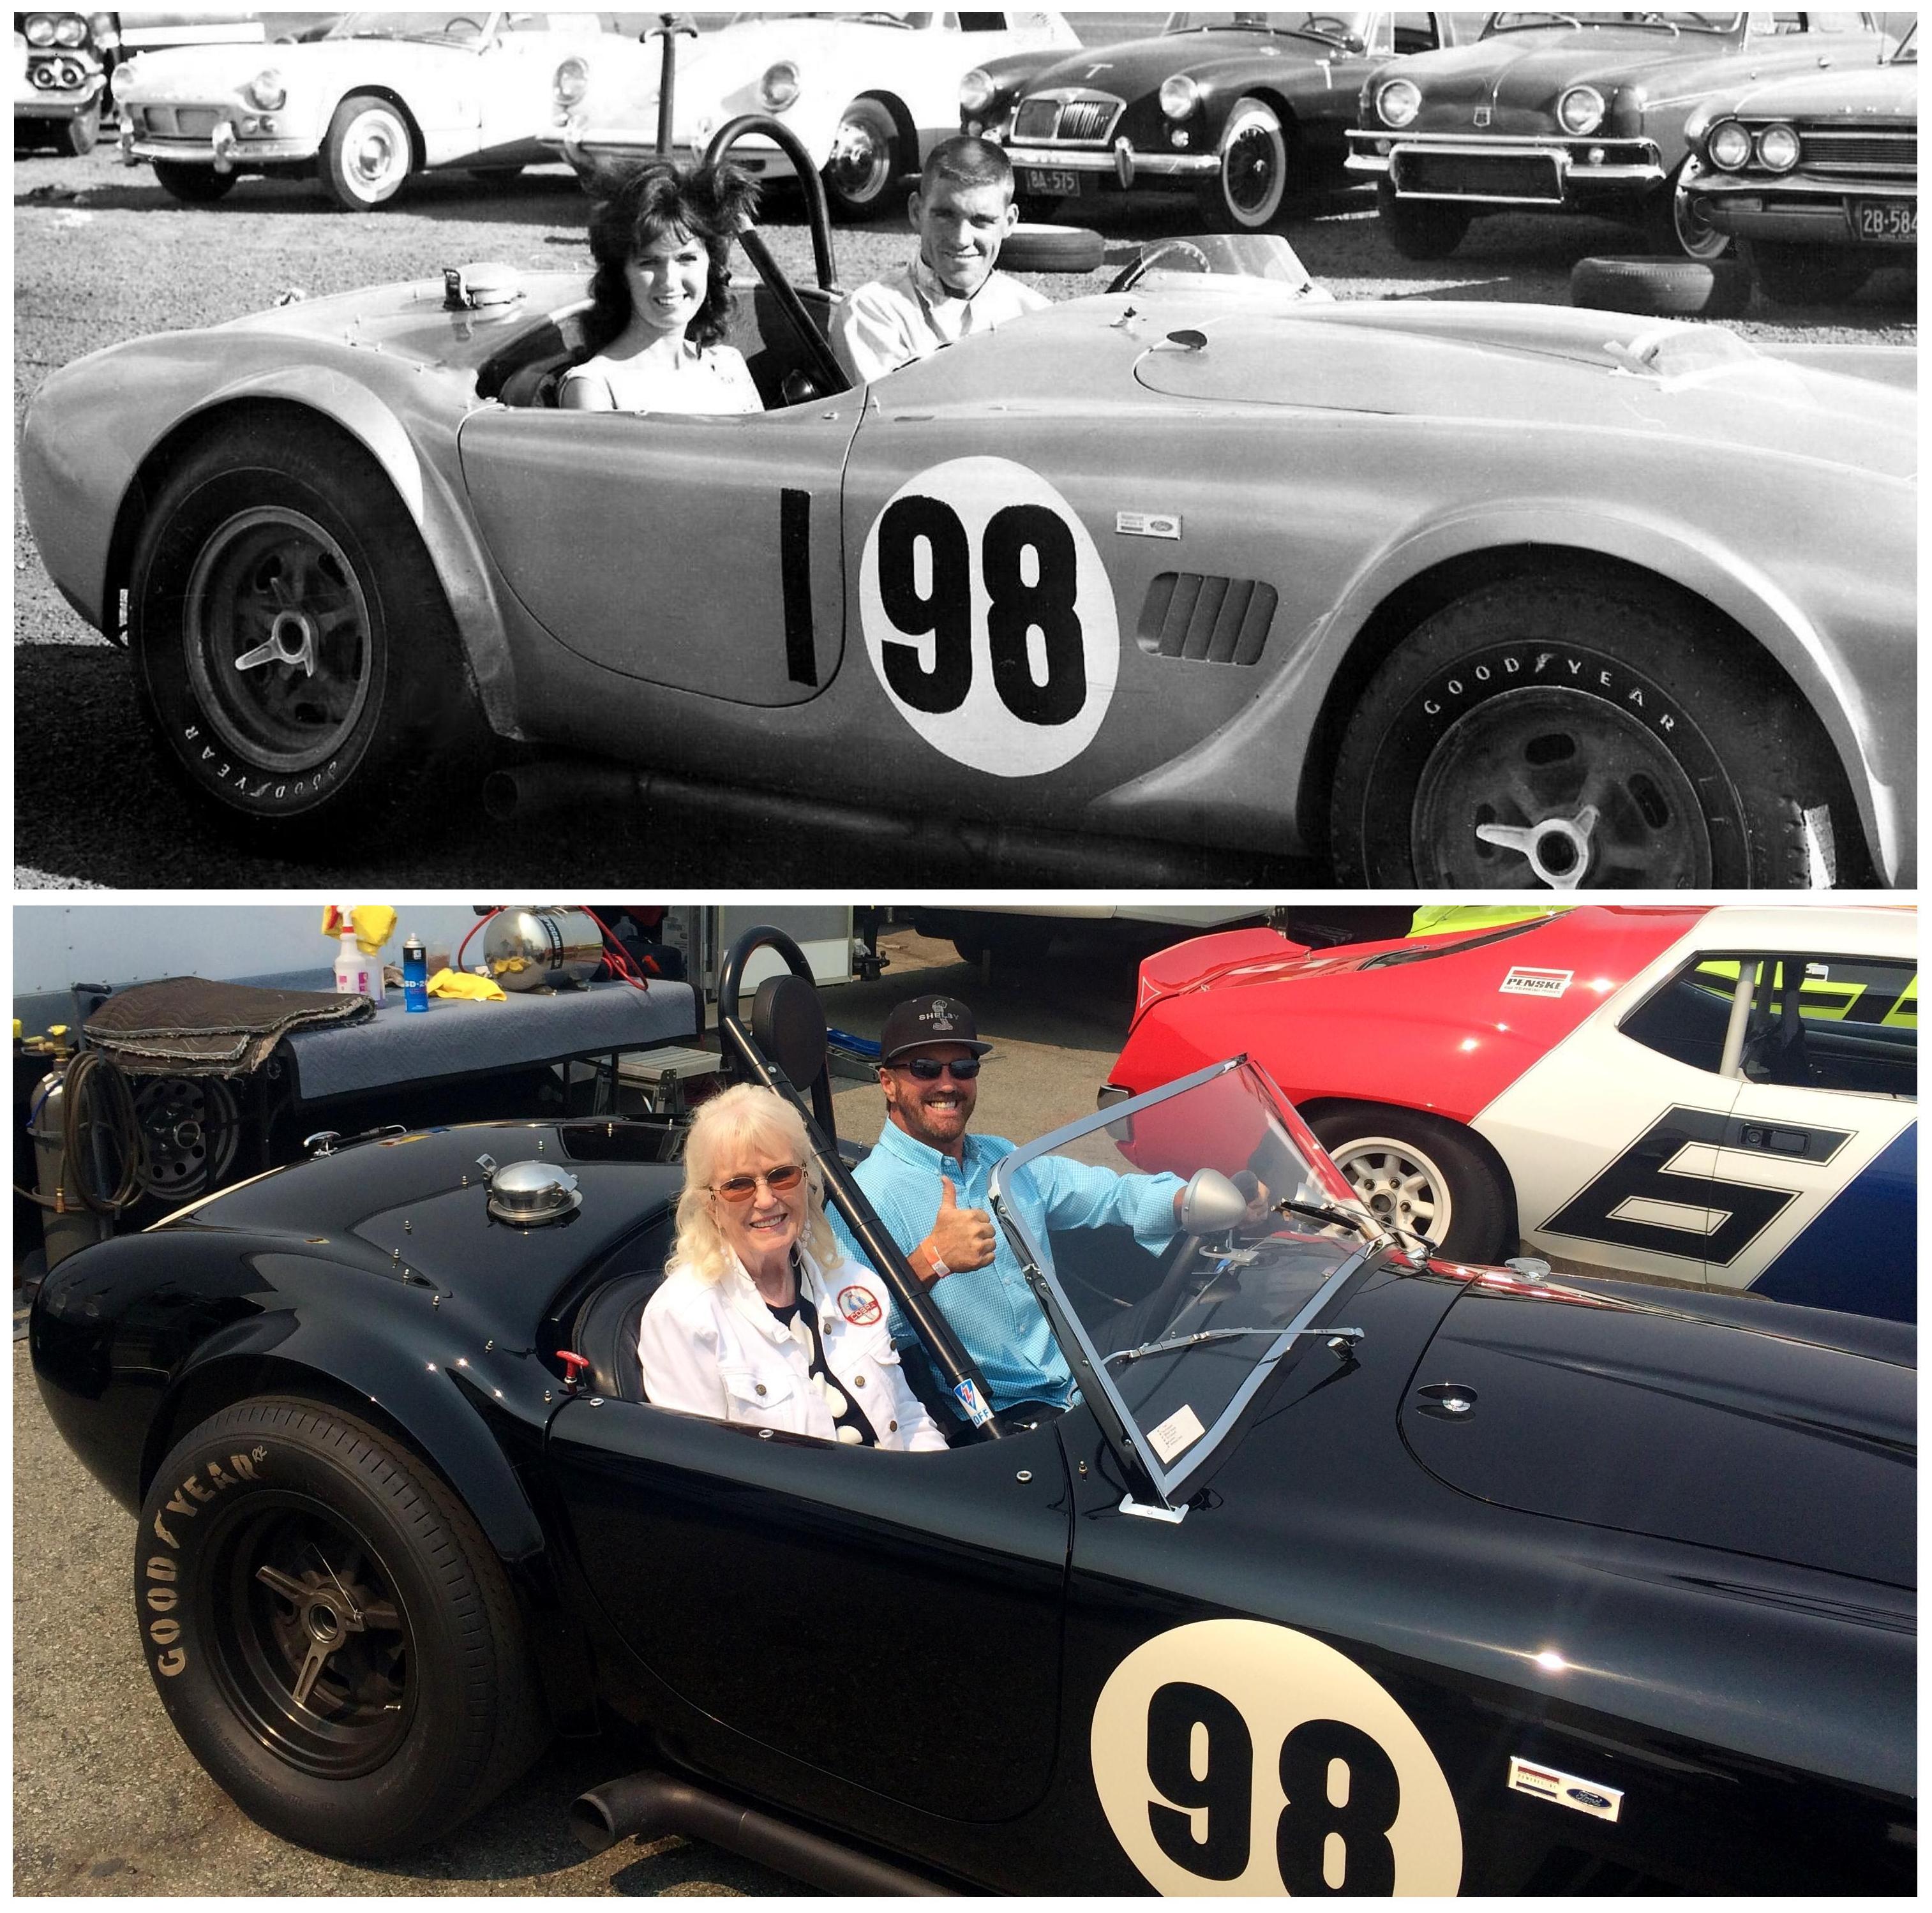 Dave MacDonald races Shelby Cobra 260 to first ever win at Riverside